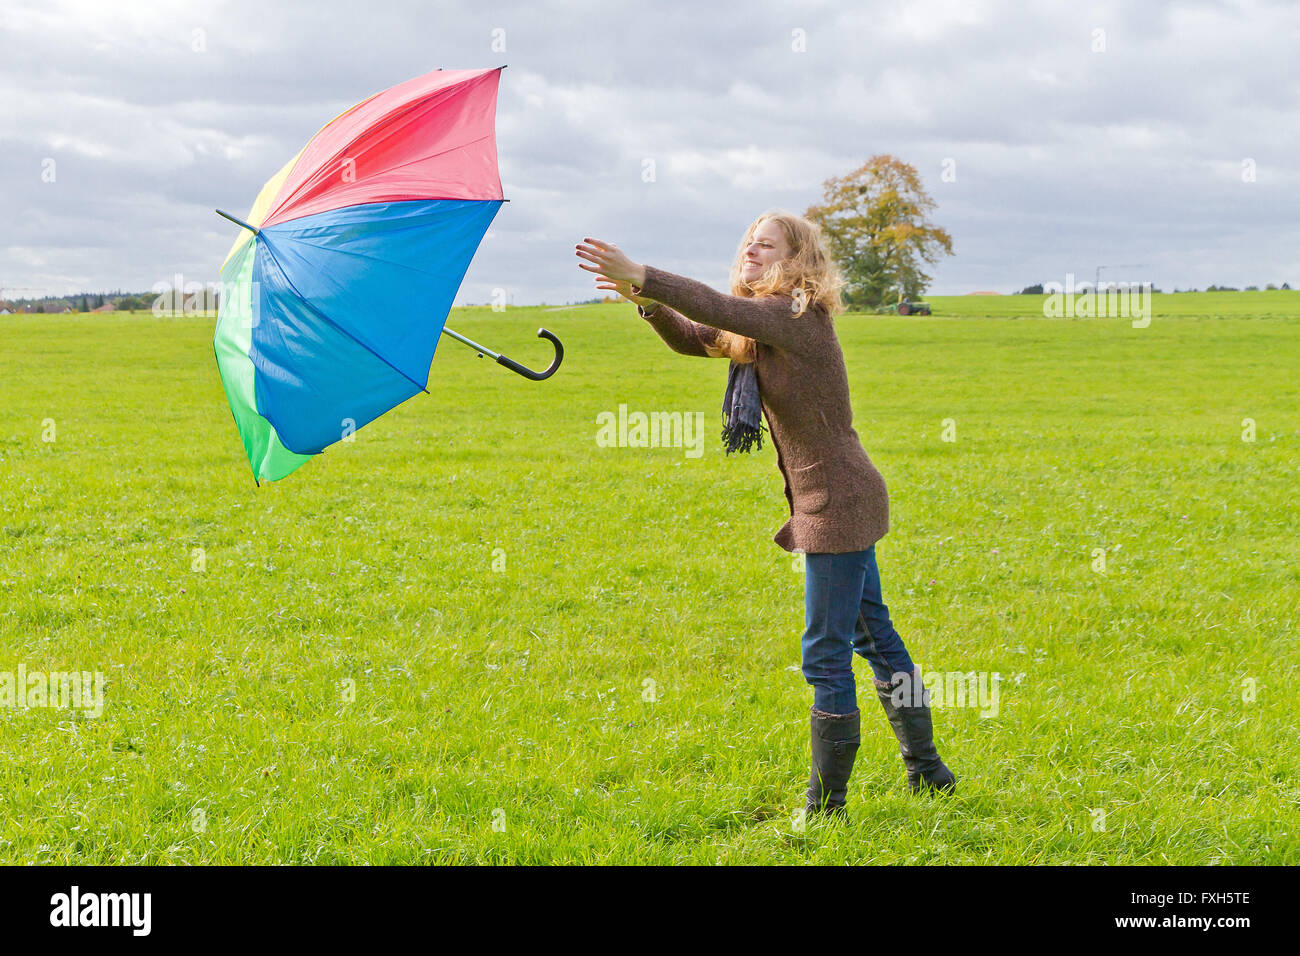 A young woman losing her umbrella in the wind Stock Photo